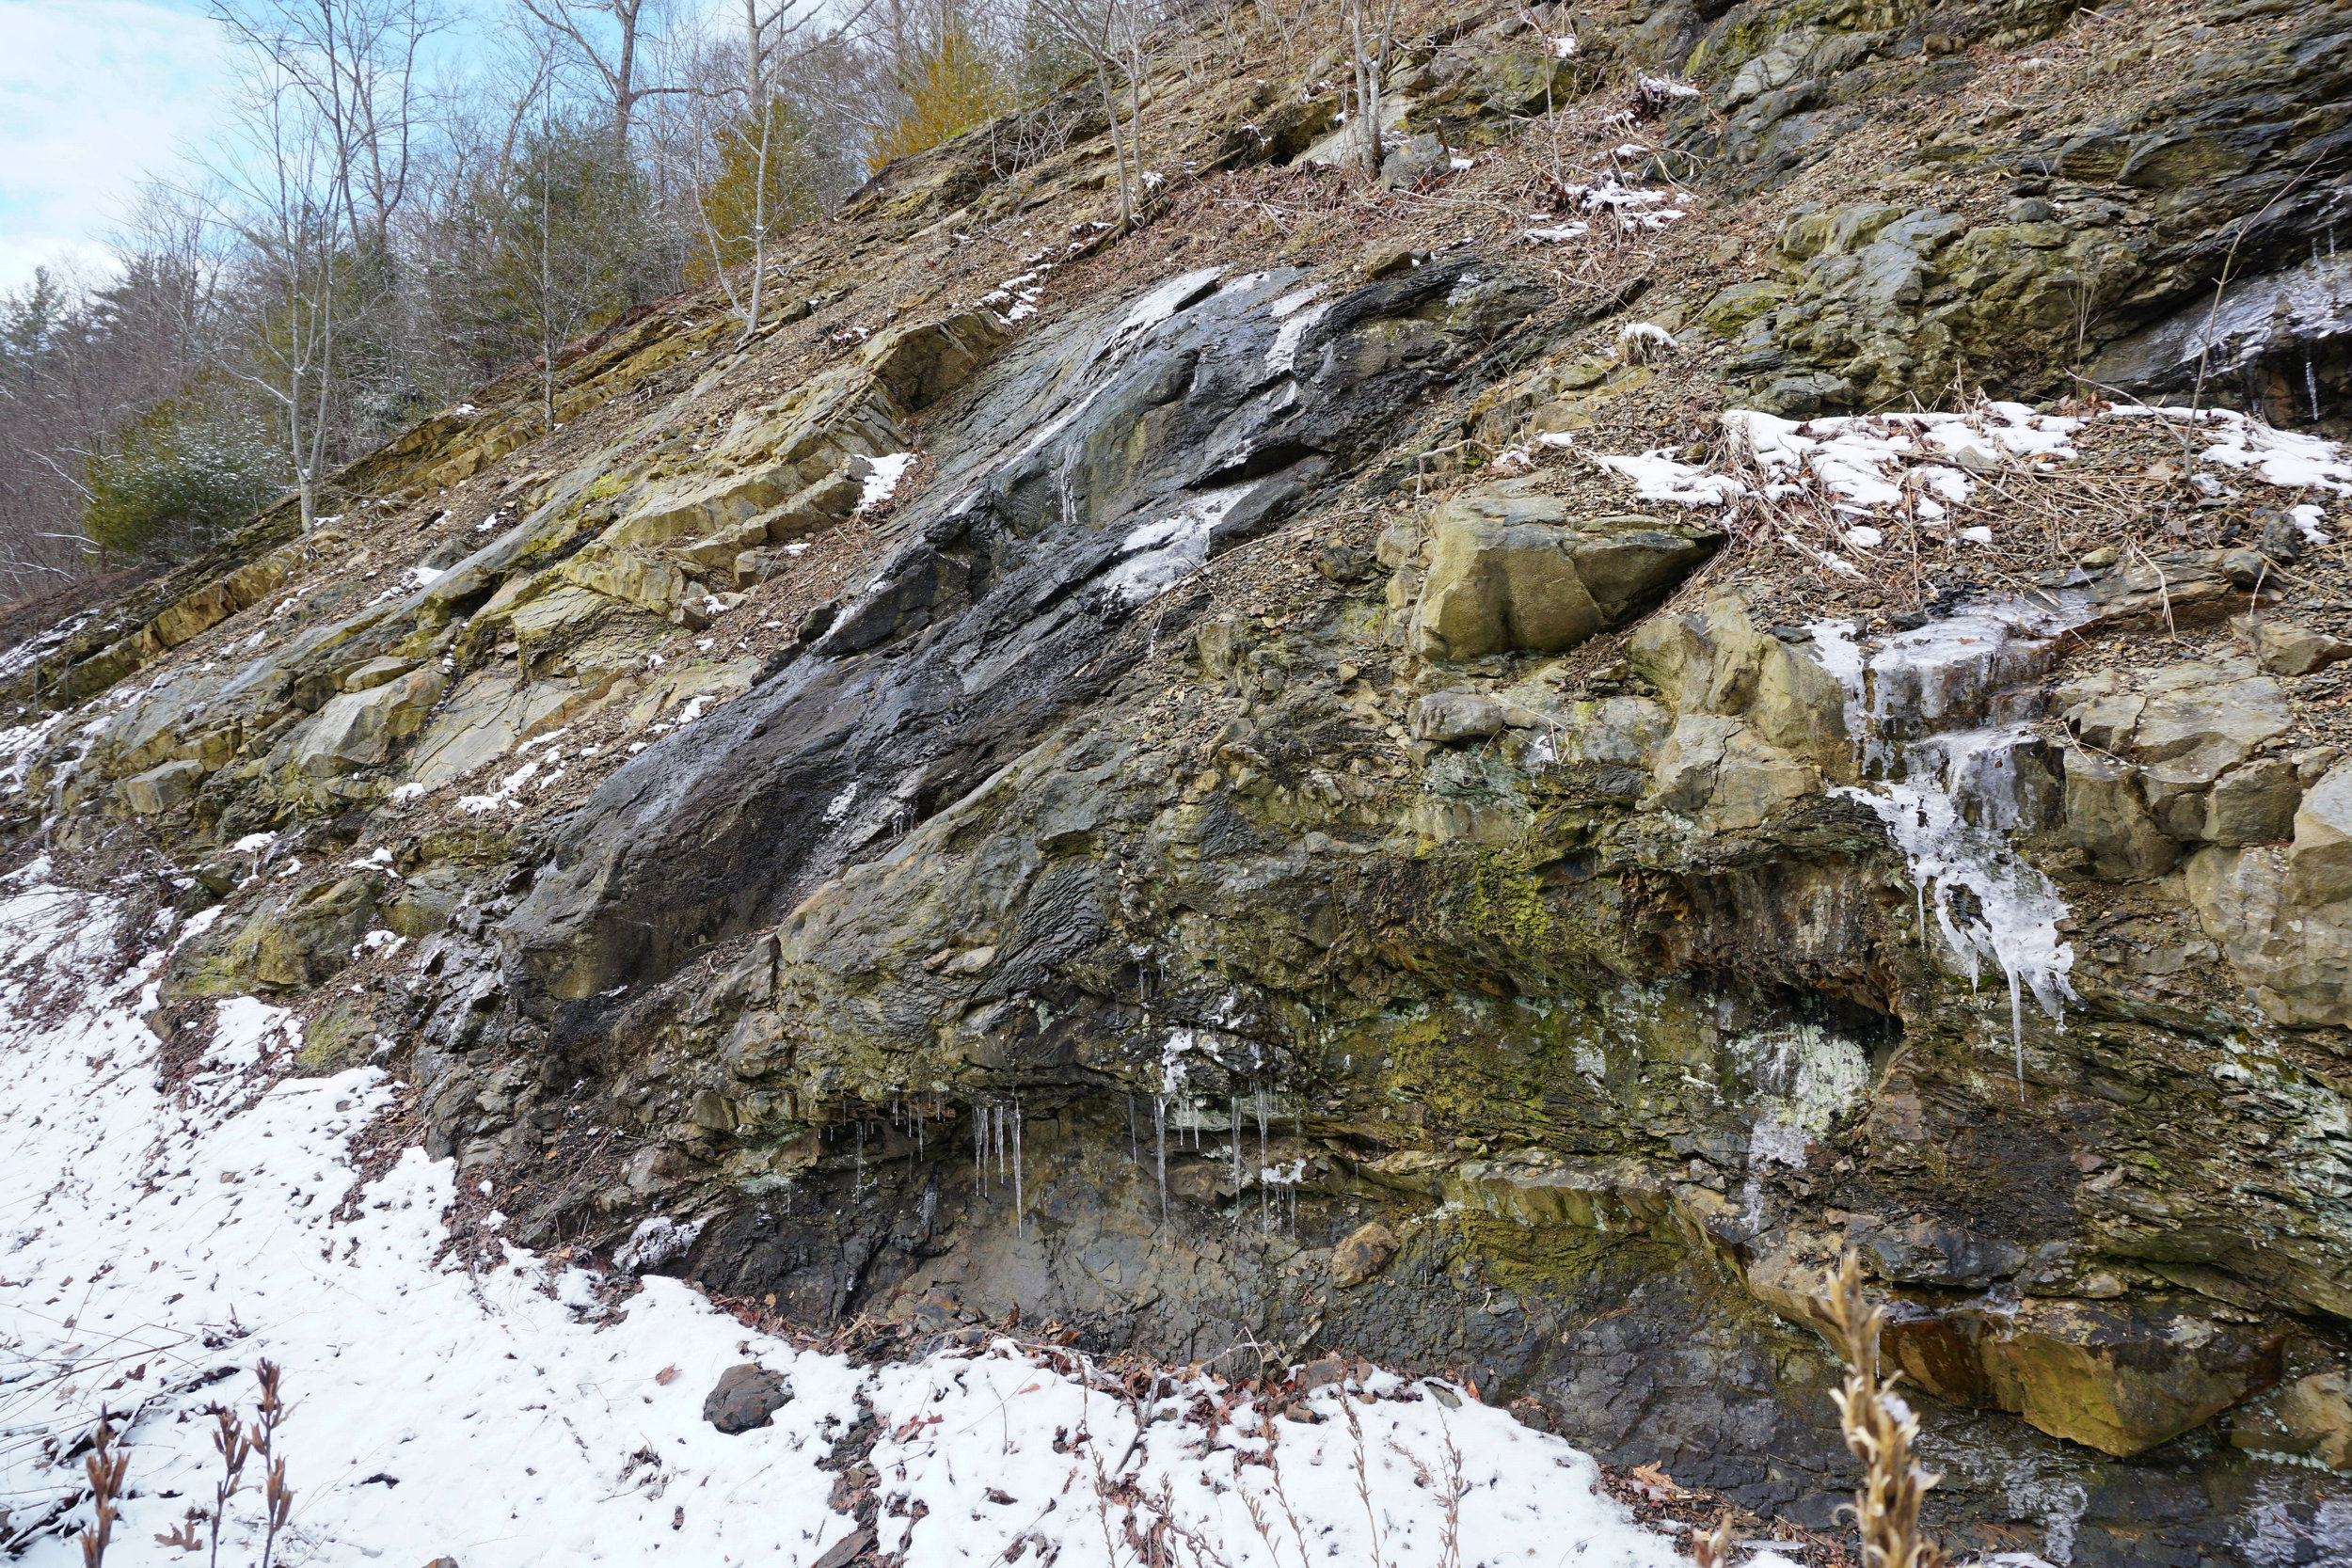 Geological evidence of the underwater landslide within the Hampton Formation.